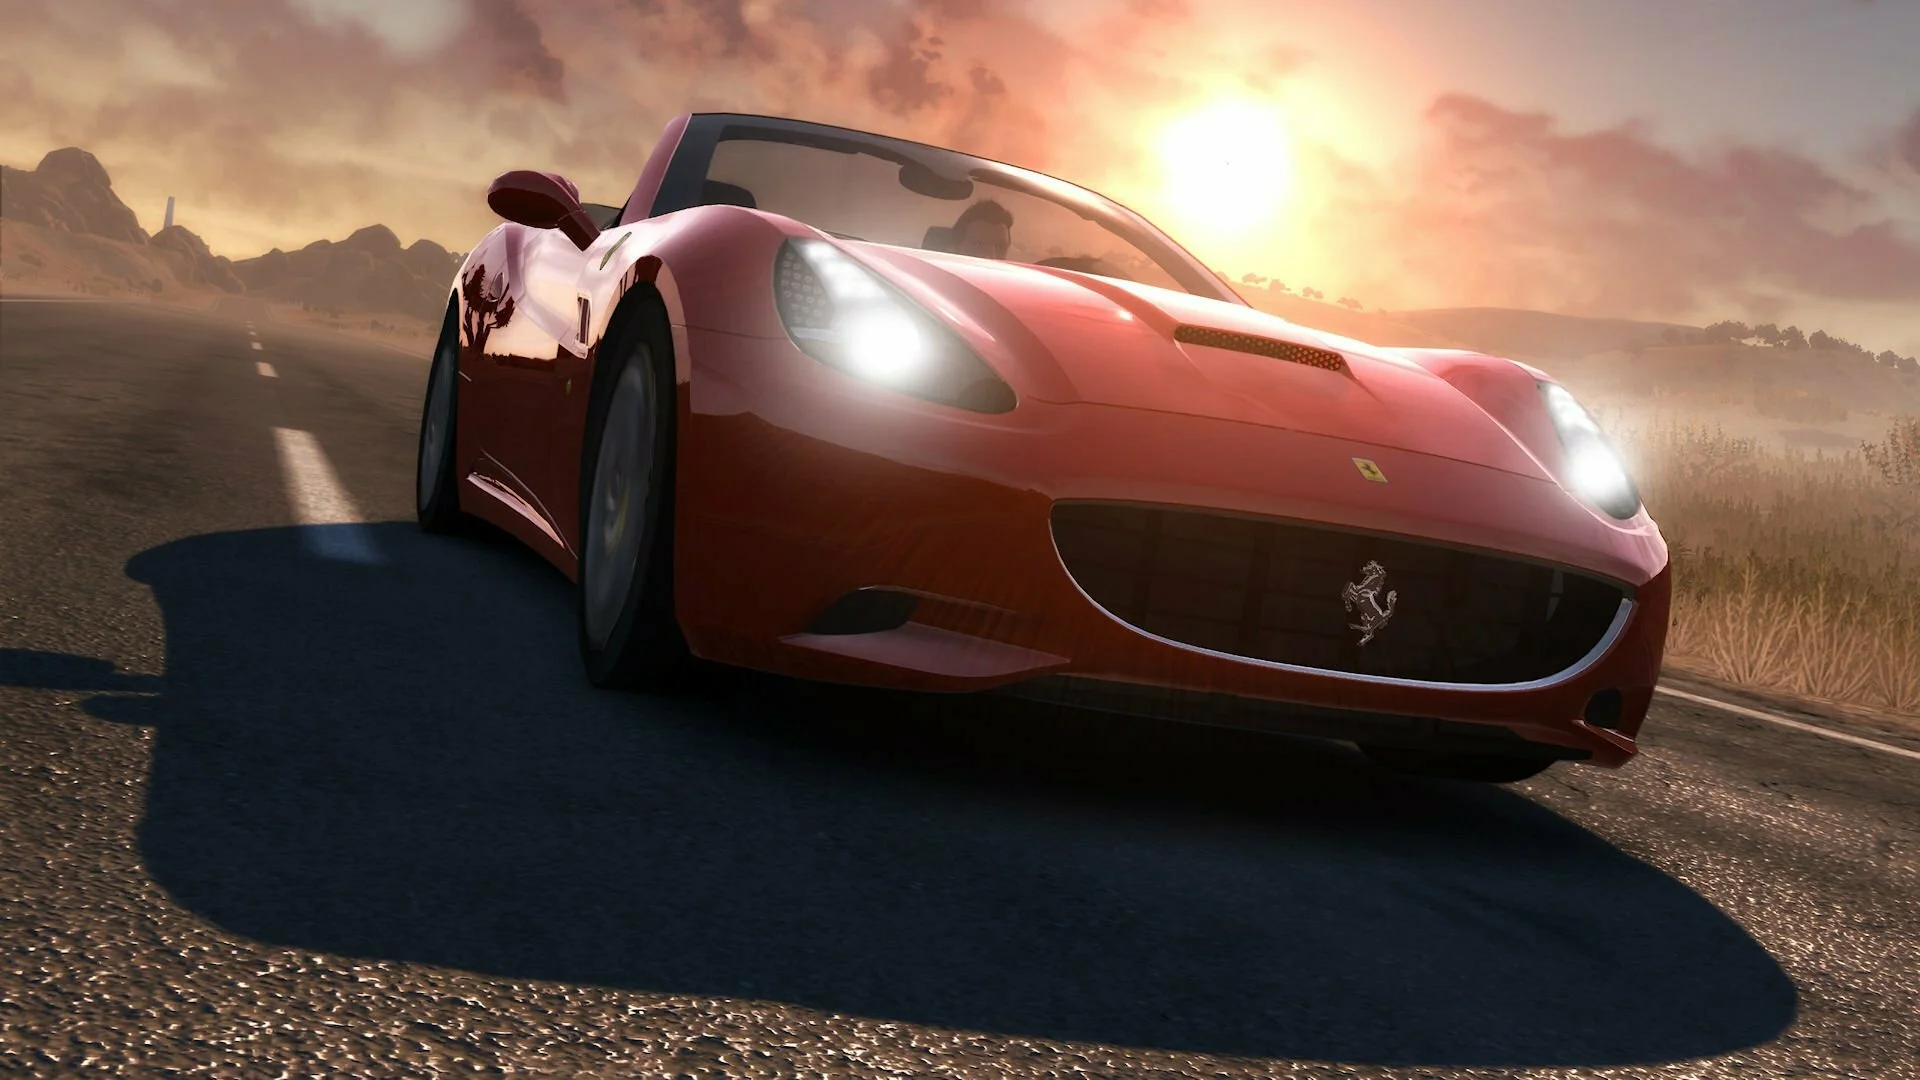 New Trailer for Upcoming Test Drive Unlimited Solar Crown Shows Ferrari Racing